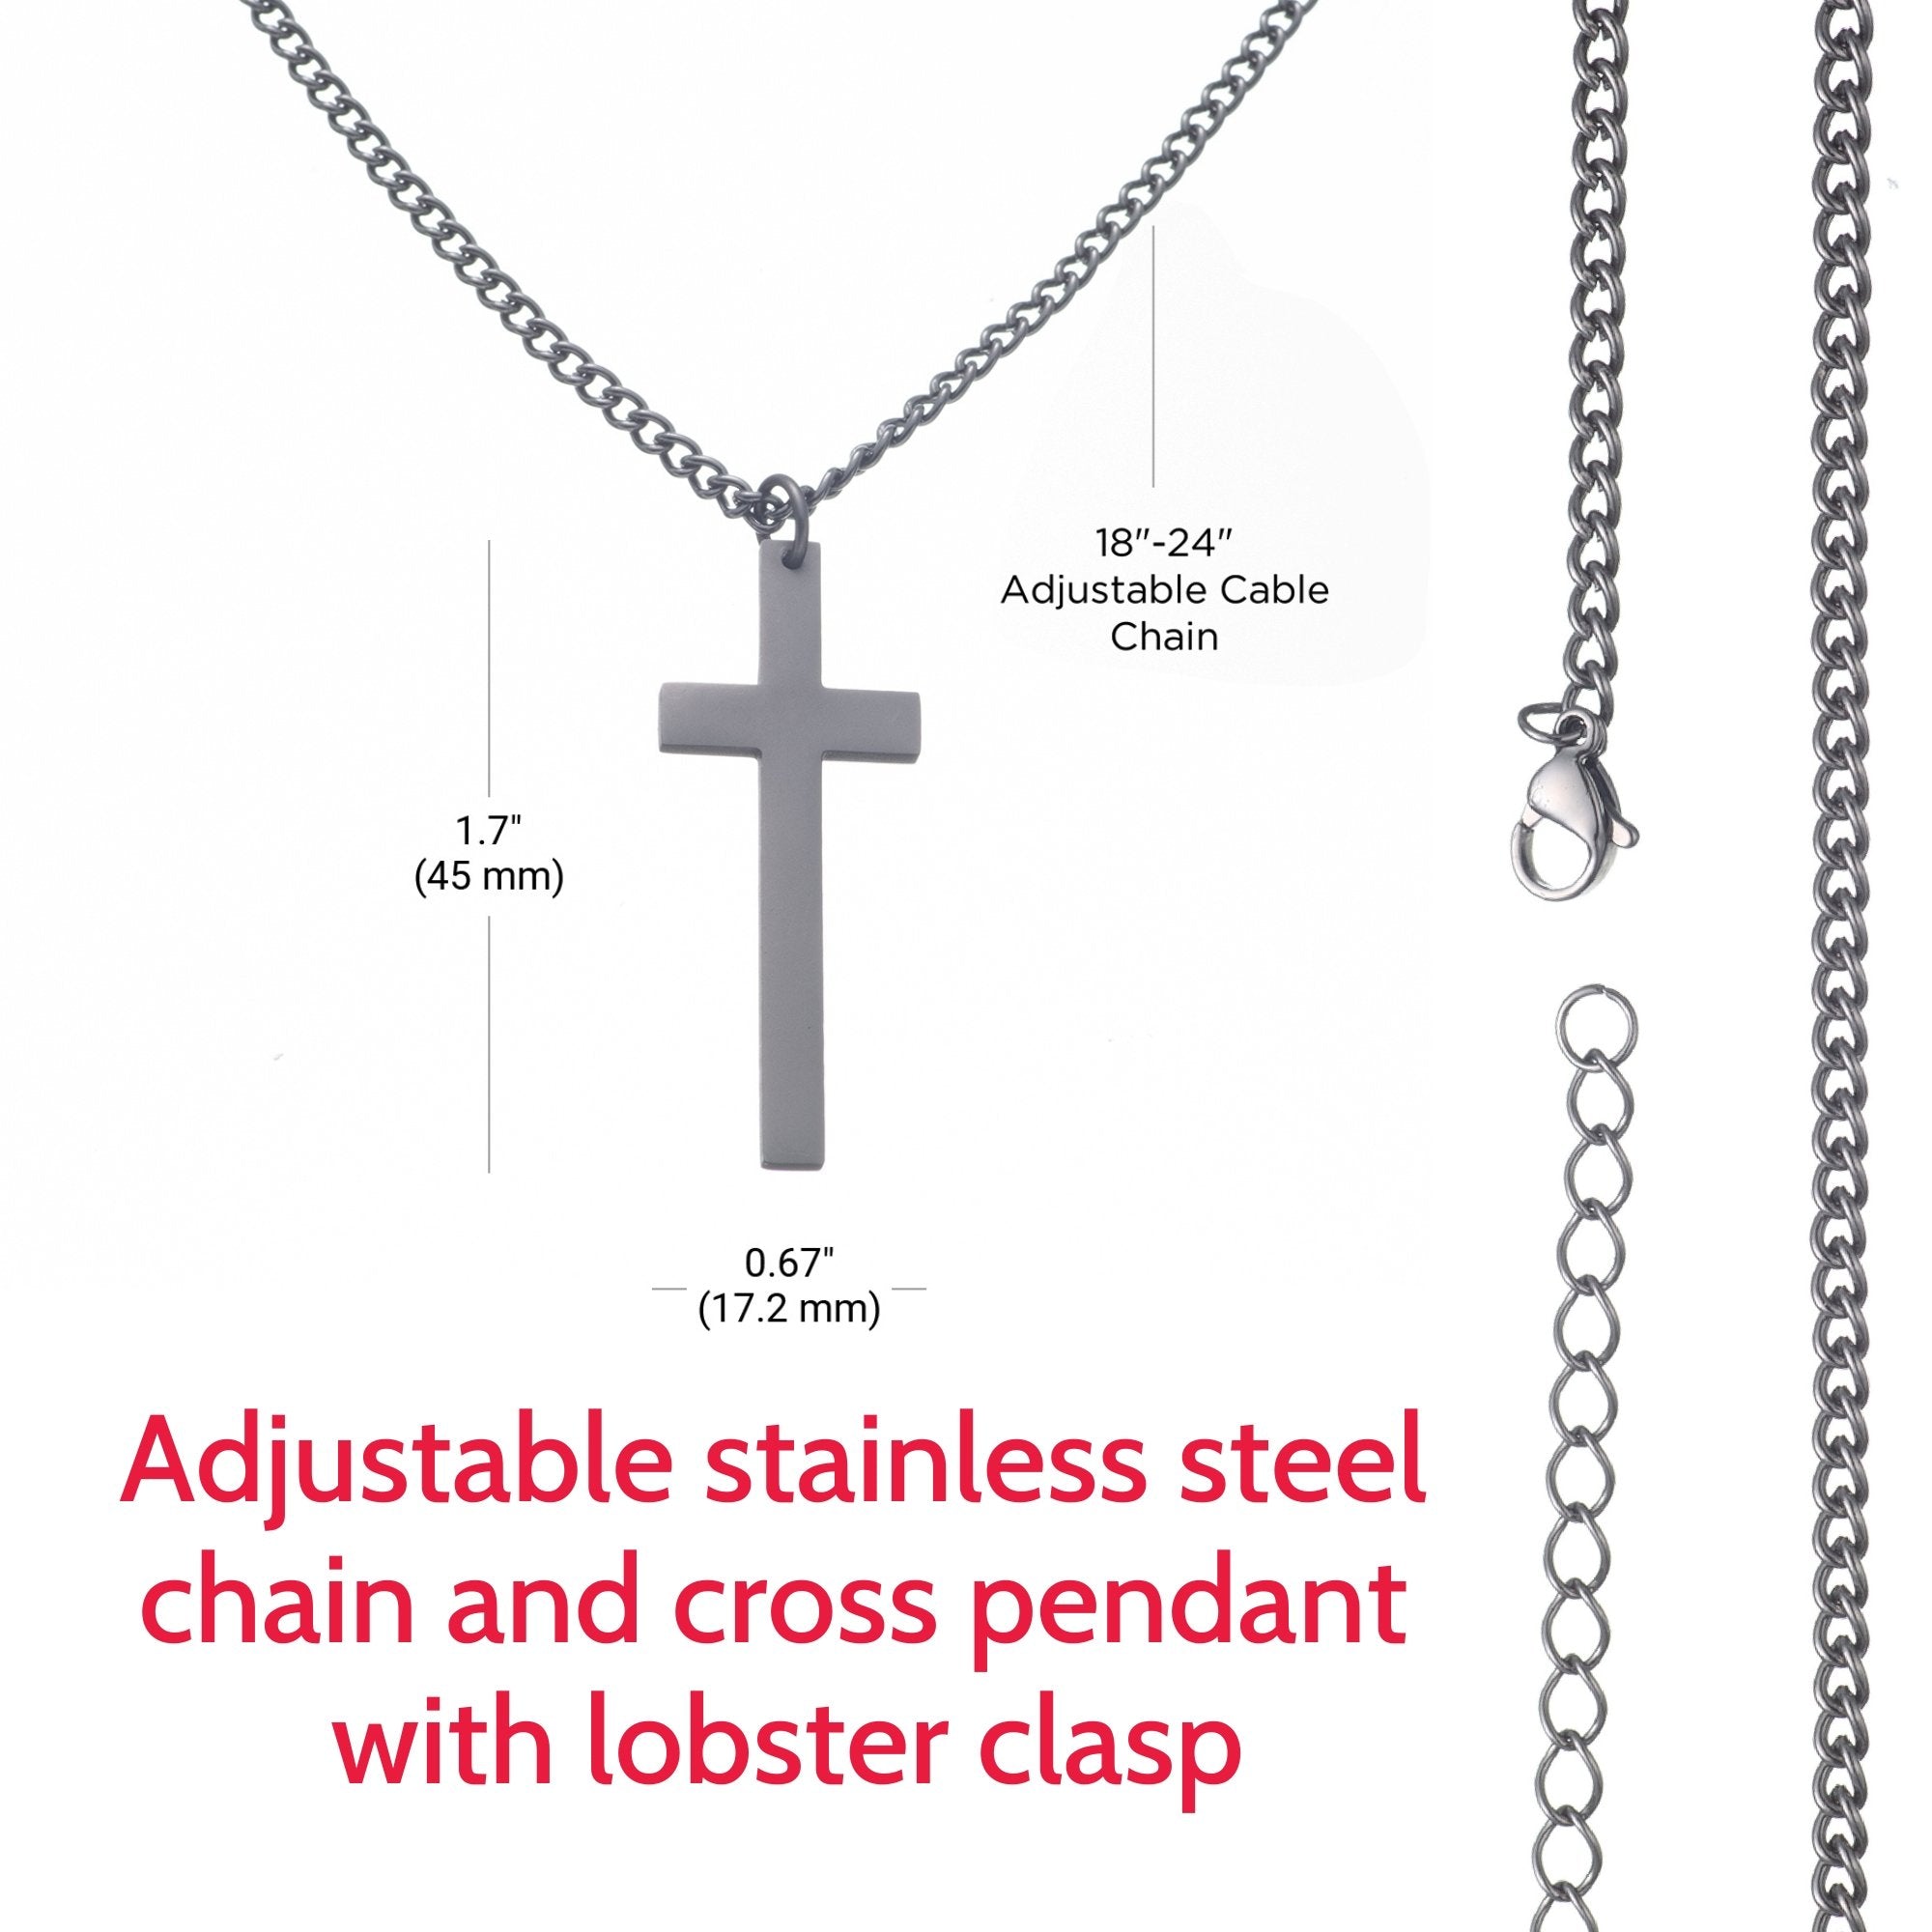 Sacred Cross Necklace, Bible Verse Psalm 61:2, Yosemite adjustable chain and lobster clasp